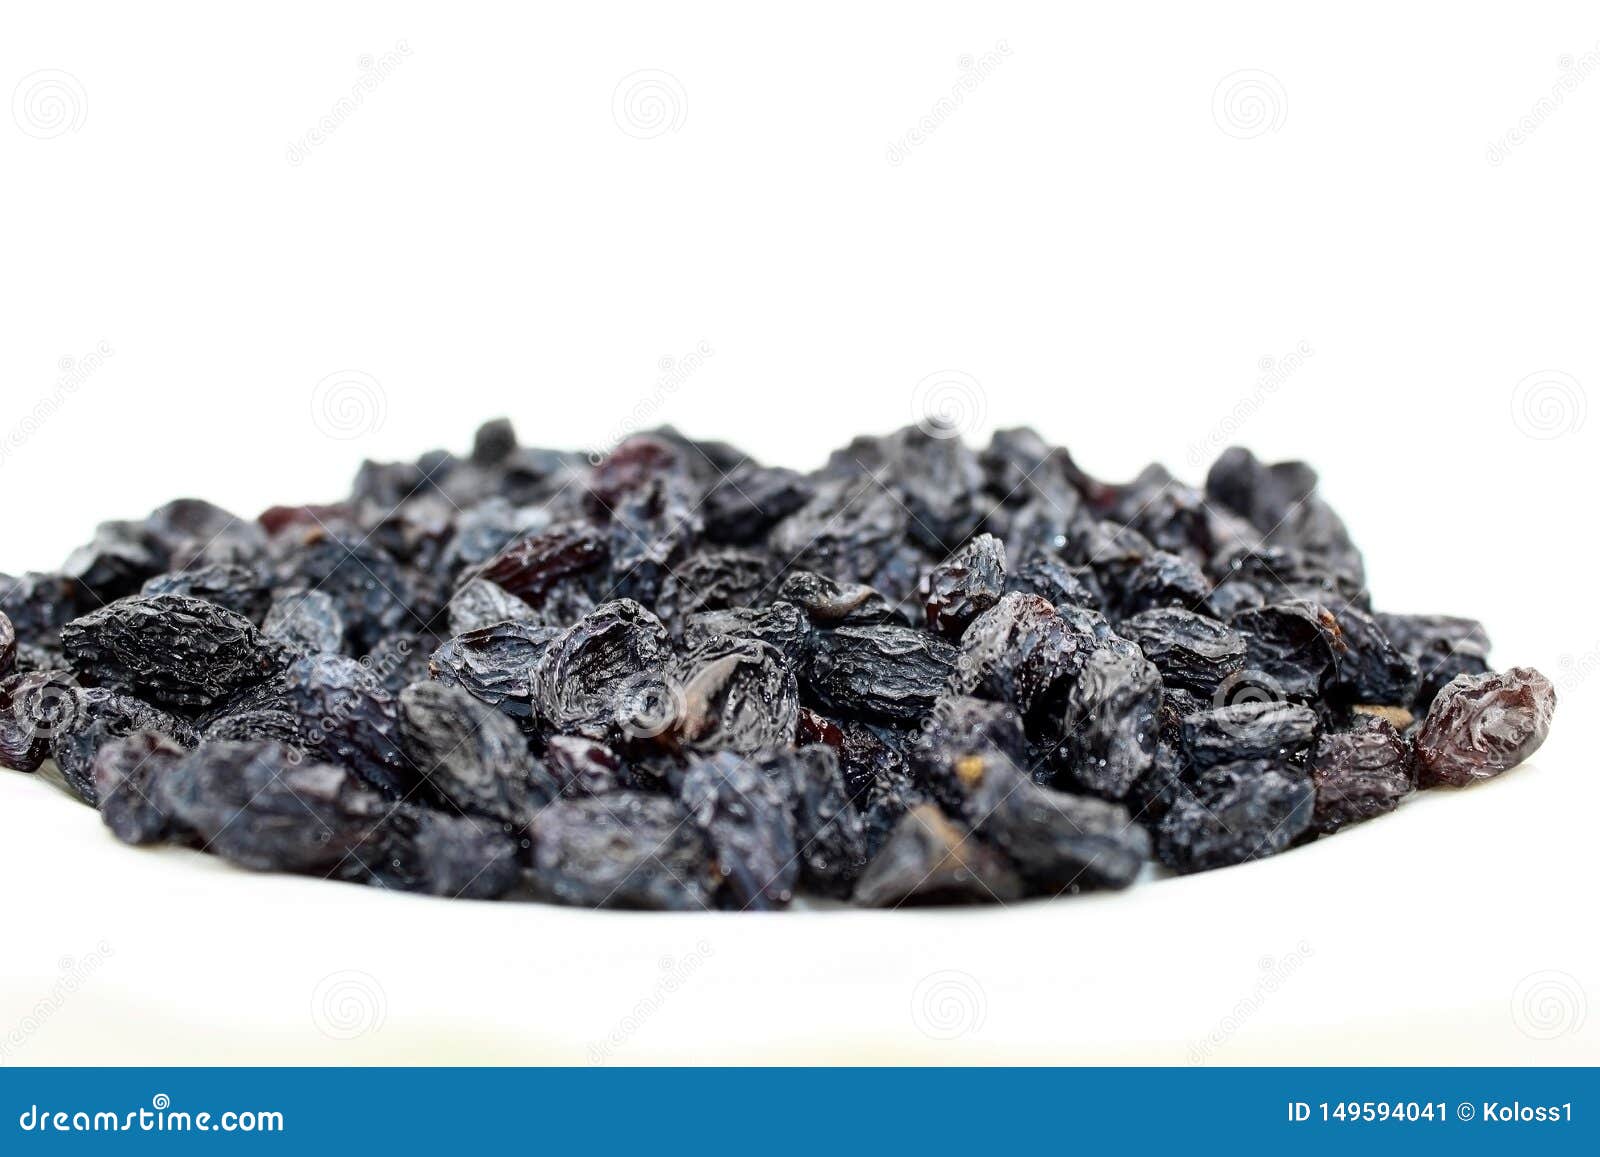 All in White Dark Blue Dried Grapes Stock Image - Image of isolated ...